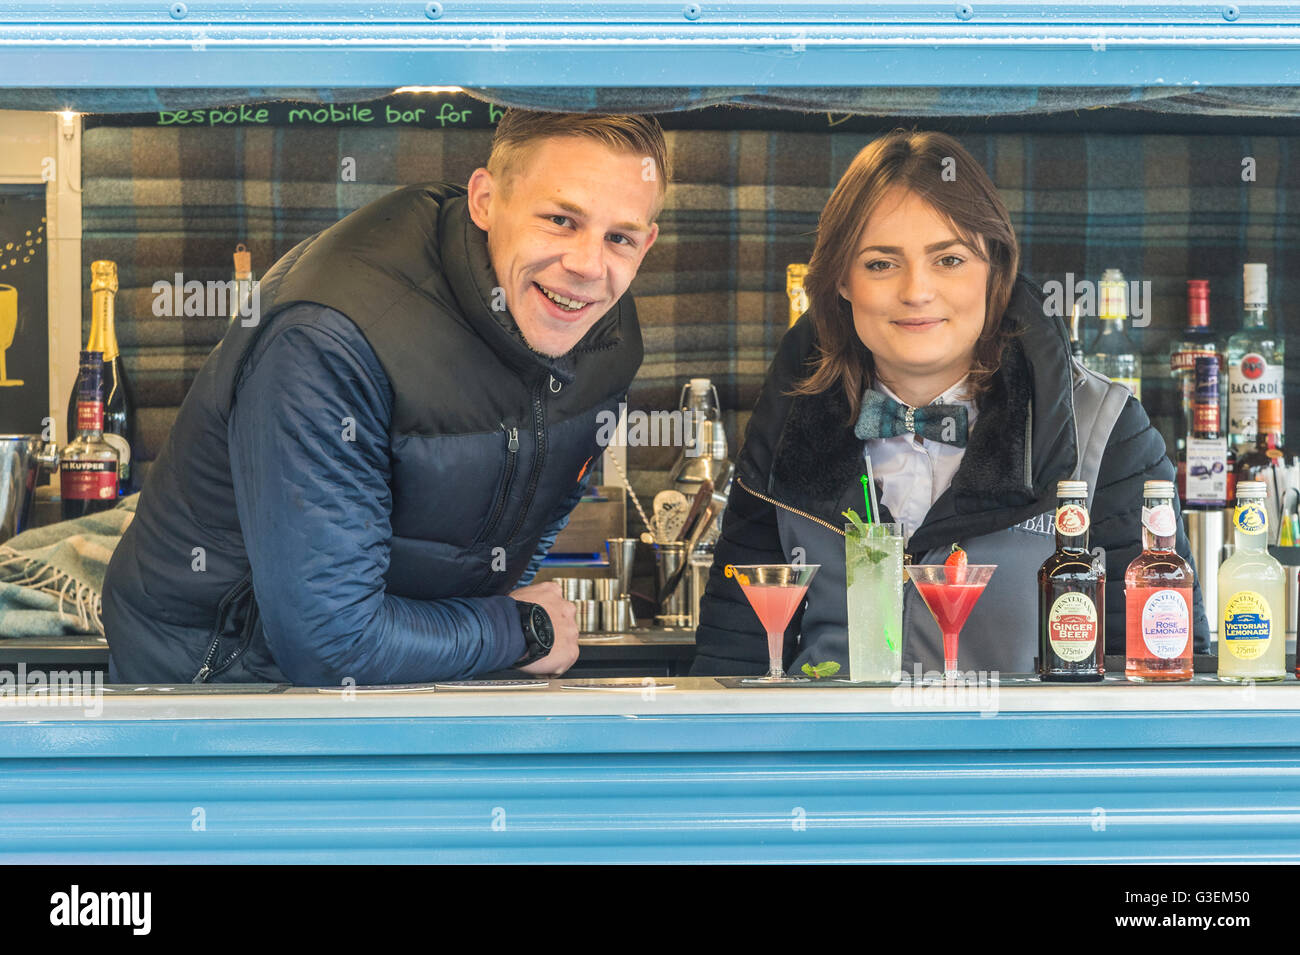 Casual outdoor portrait of a happy young couple operating a small business from a 1950's Citroen mobile bar Stock Photo